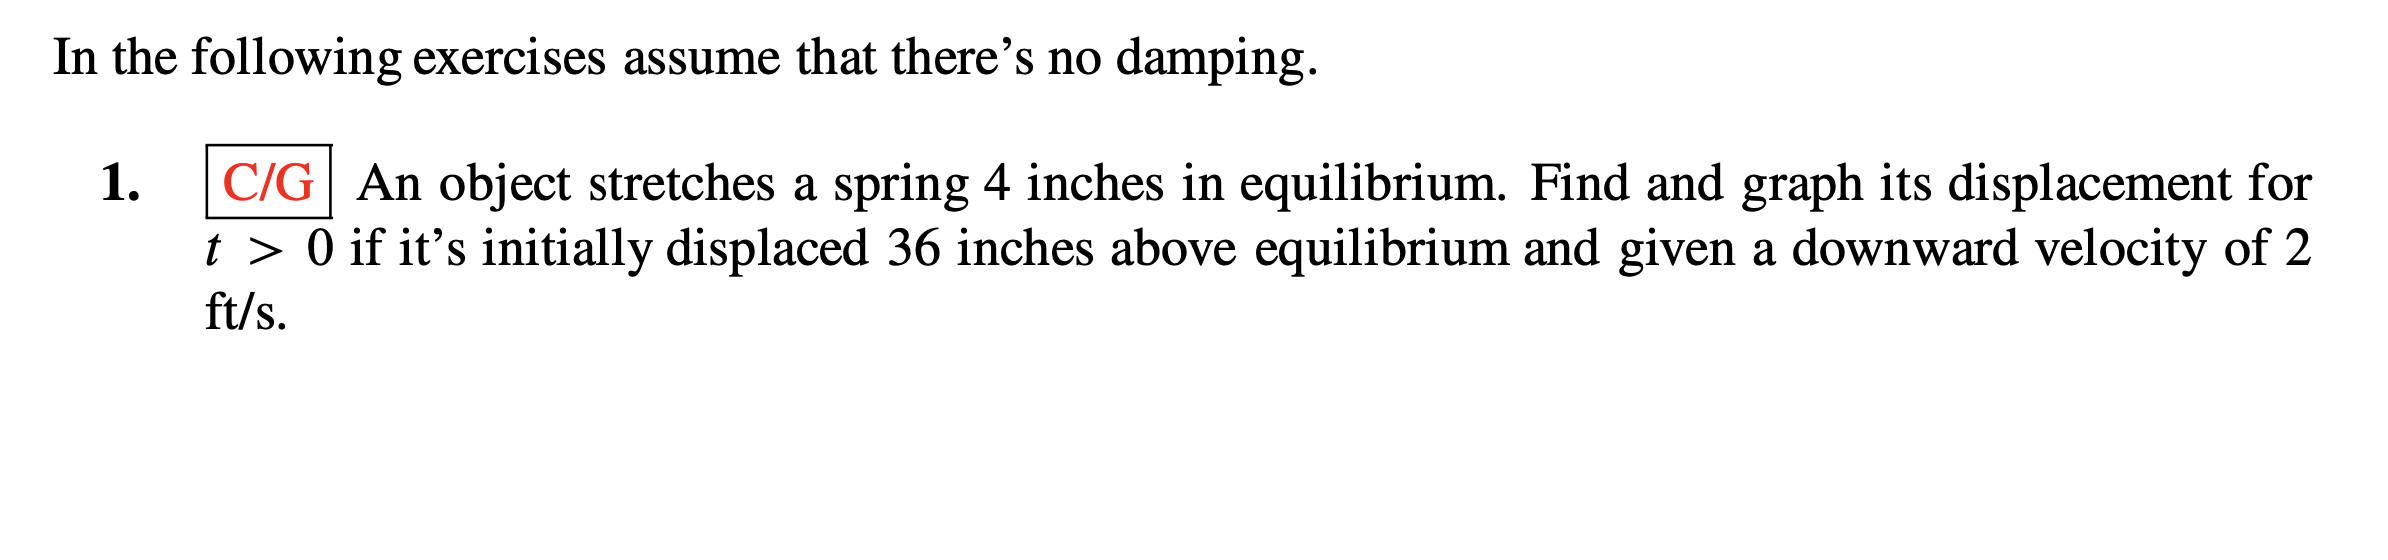 In the following exercises assume that there's no damping.
C/G| An object stretches a spring 4 inches in equilibrium. Find and graph its displacement for
t > 0 if it's initially displaced 36 inches above equilibrium and given a downward velocity of 2
1.
ft/s.
